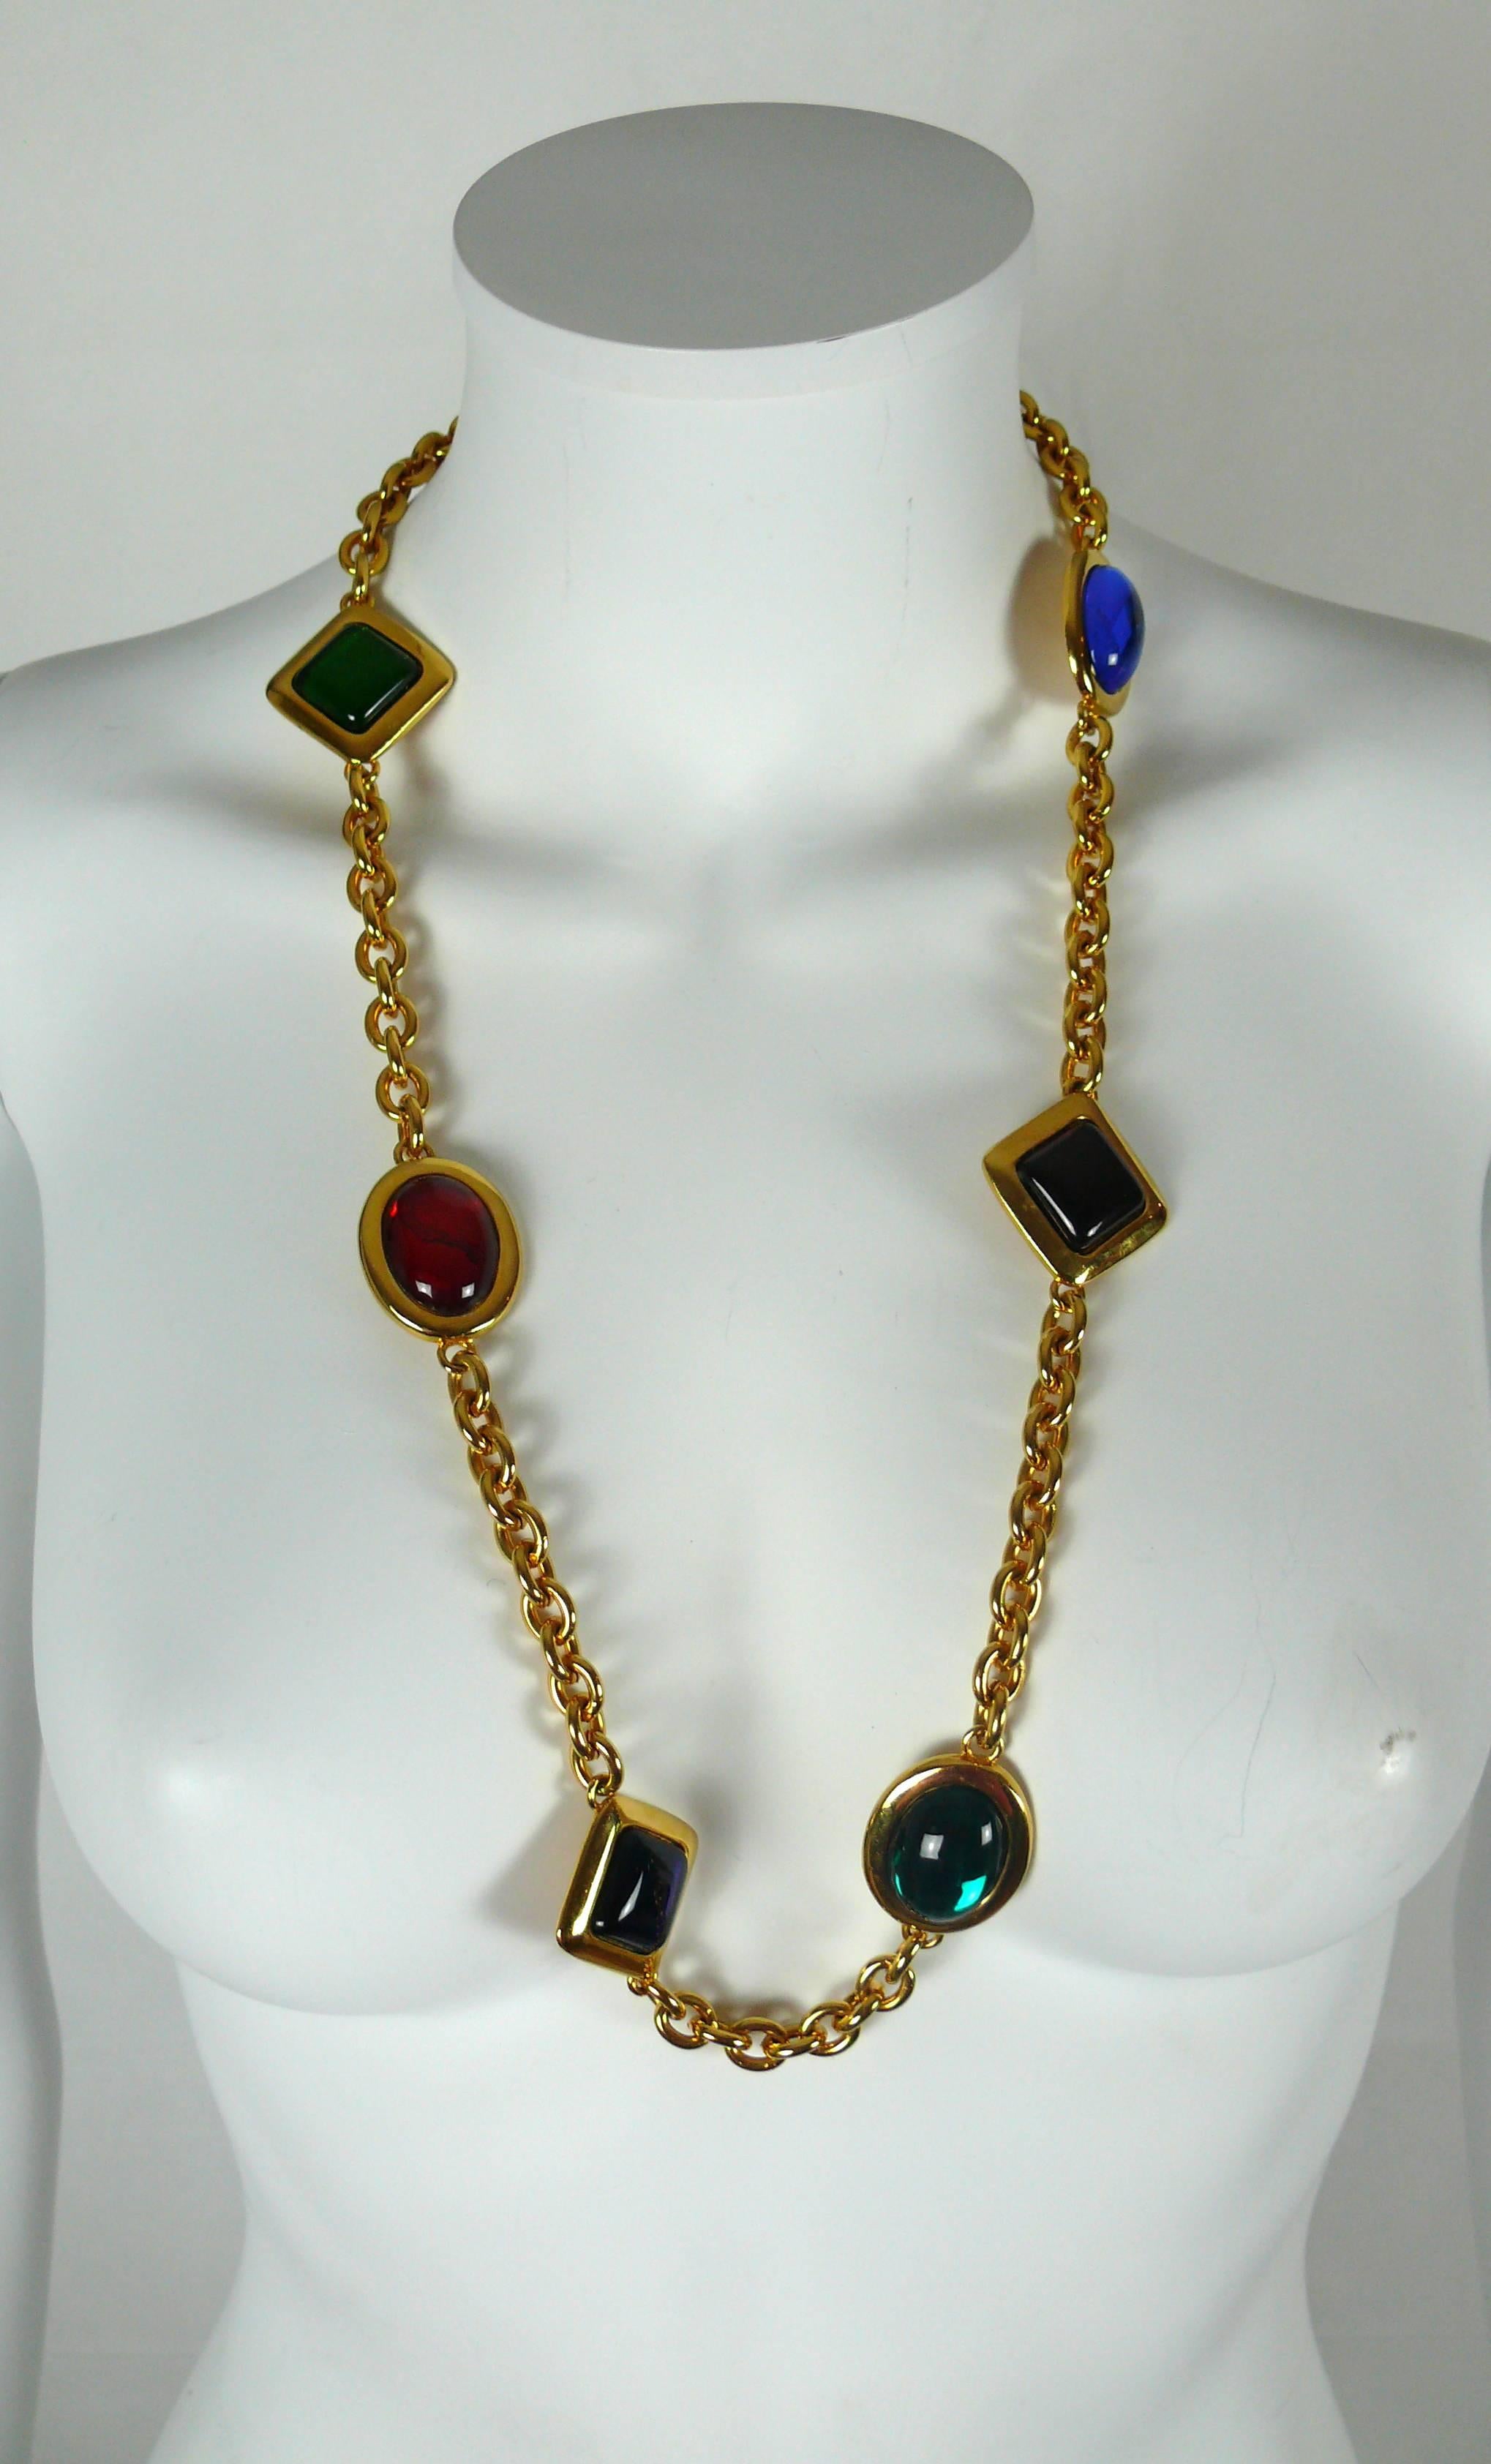 CELINE vintage gold tone chain necklace embellished with multicolored glass cabochons in blue, purple, red and green.

May be worn as a necklace or belt.

T-bar closure.

Embossed CELINE Paris Made in France.
Numbered G3.

Indicative measurements :